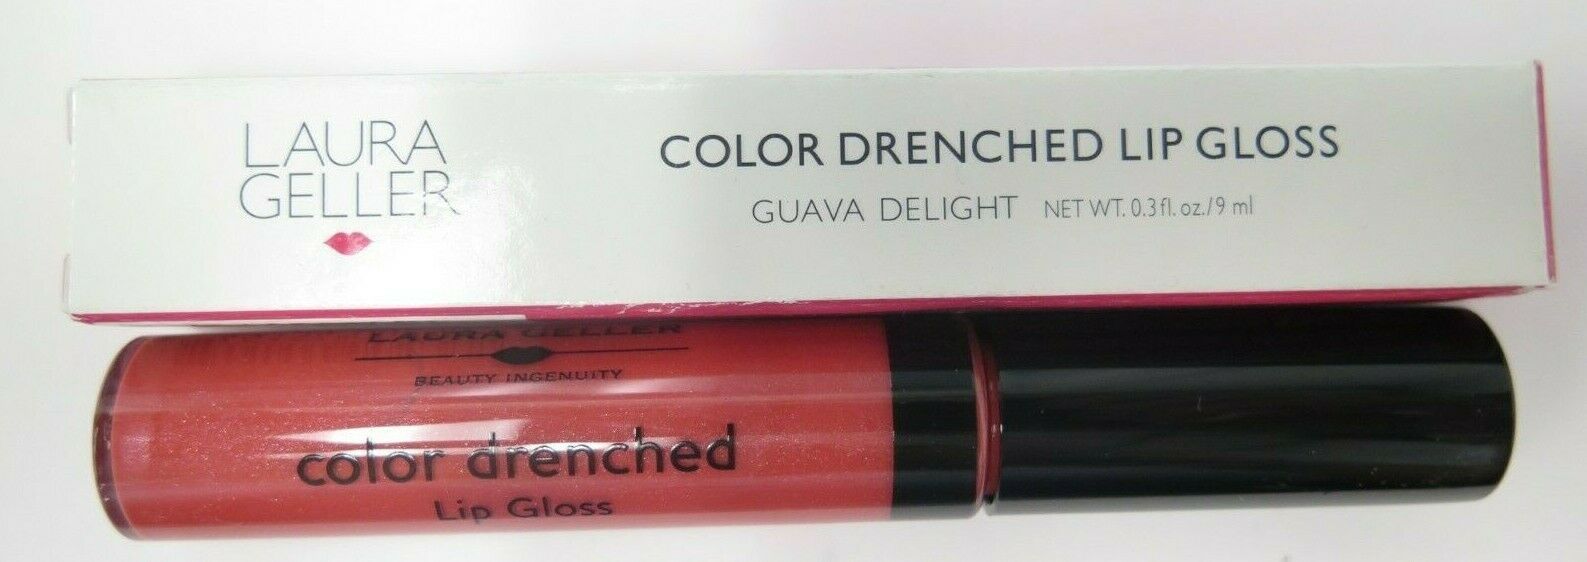 Laura Geller Color Drenched Lip Gloss *choose your shade* - $12.95